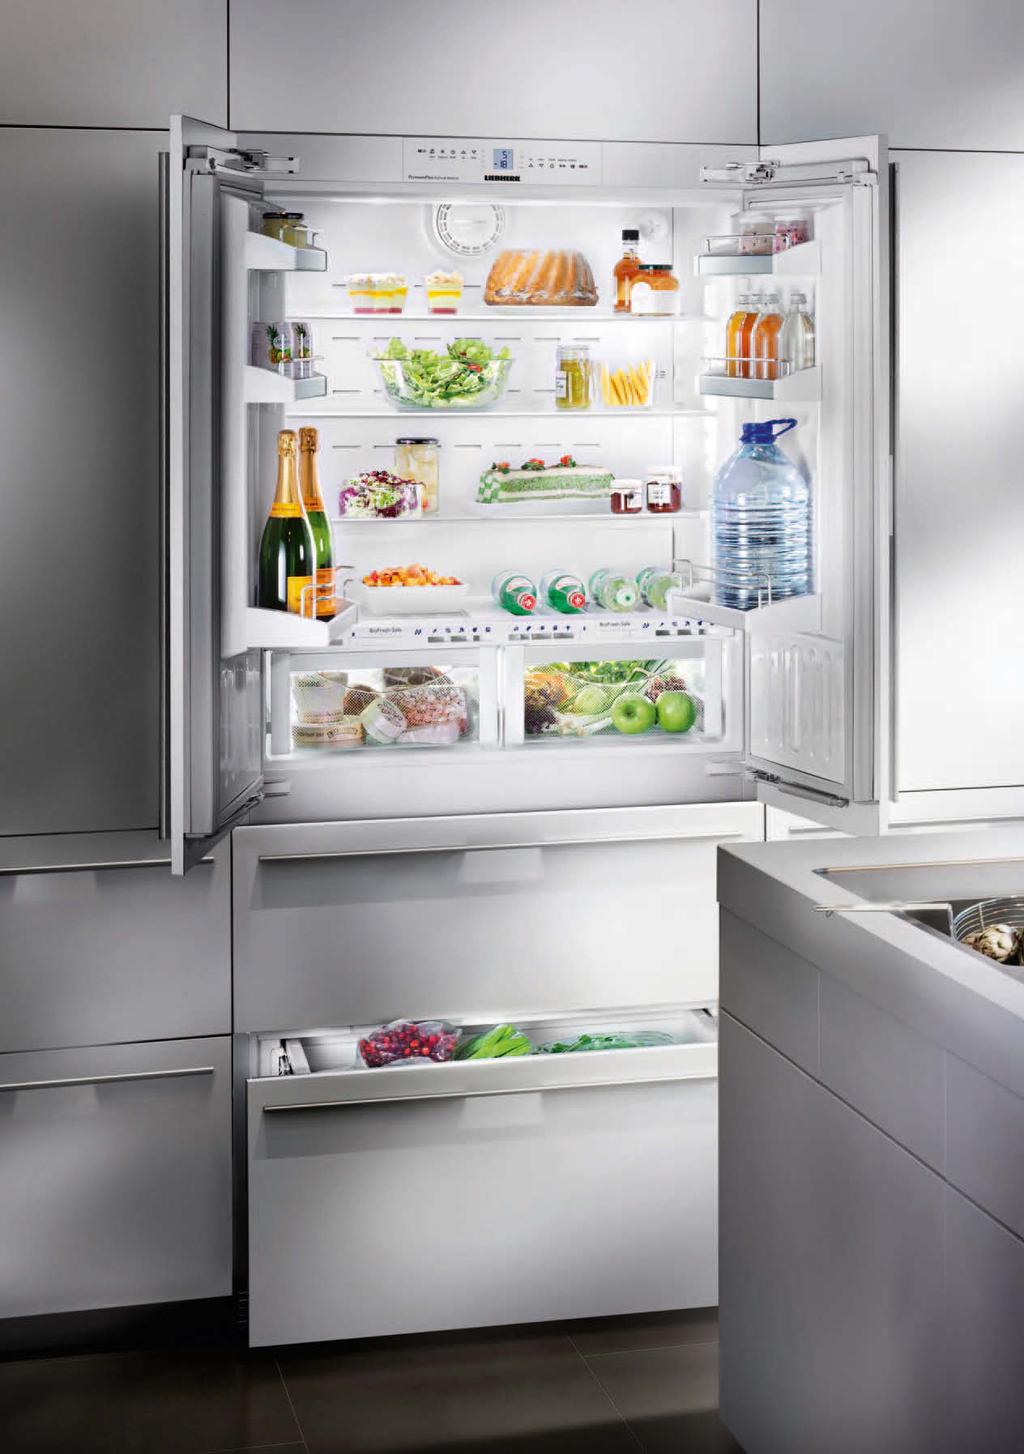 Integrated Frenchdoor fridge-freezer with BioFresh: ECBN 656 Built-in The 91 cm wide, Frenchdoor fridge- freezer is definitely a design highlight in any kitchen and, with LIEBHERR s BioFresh